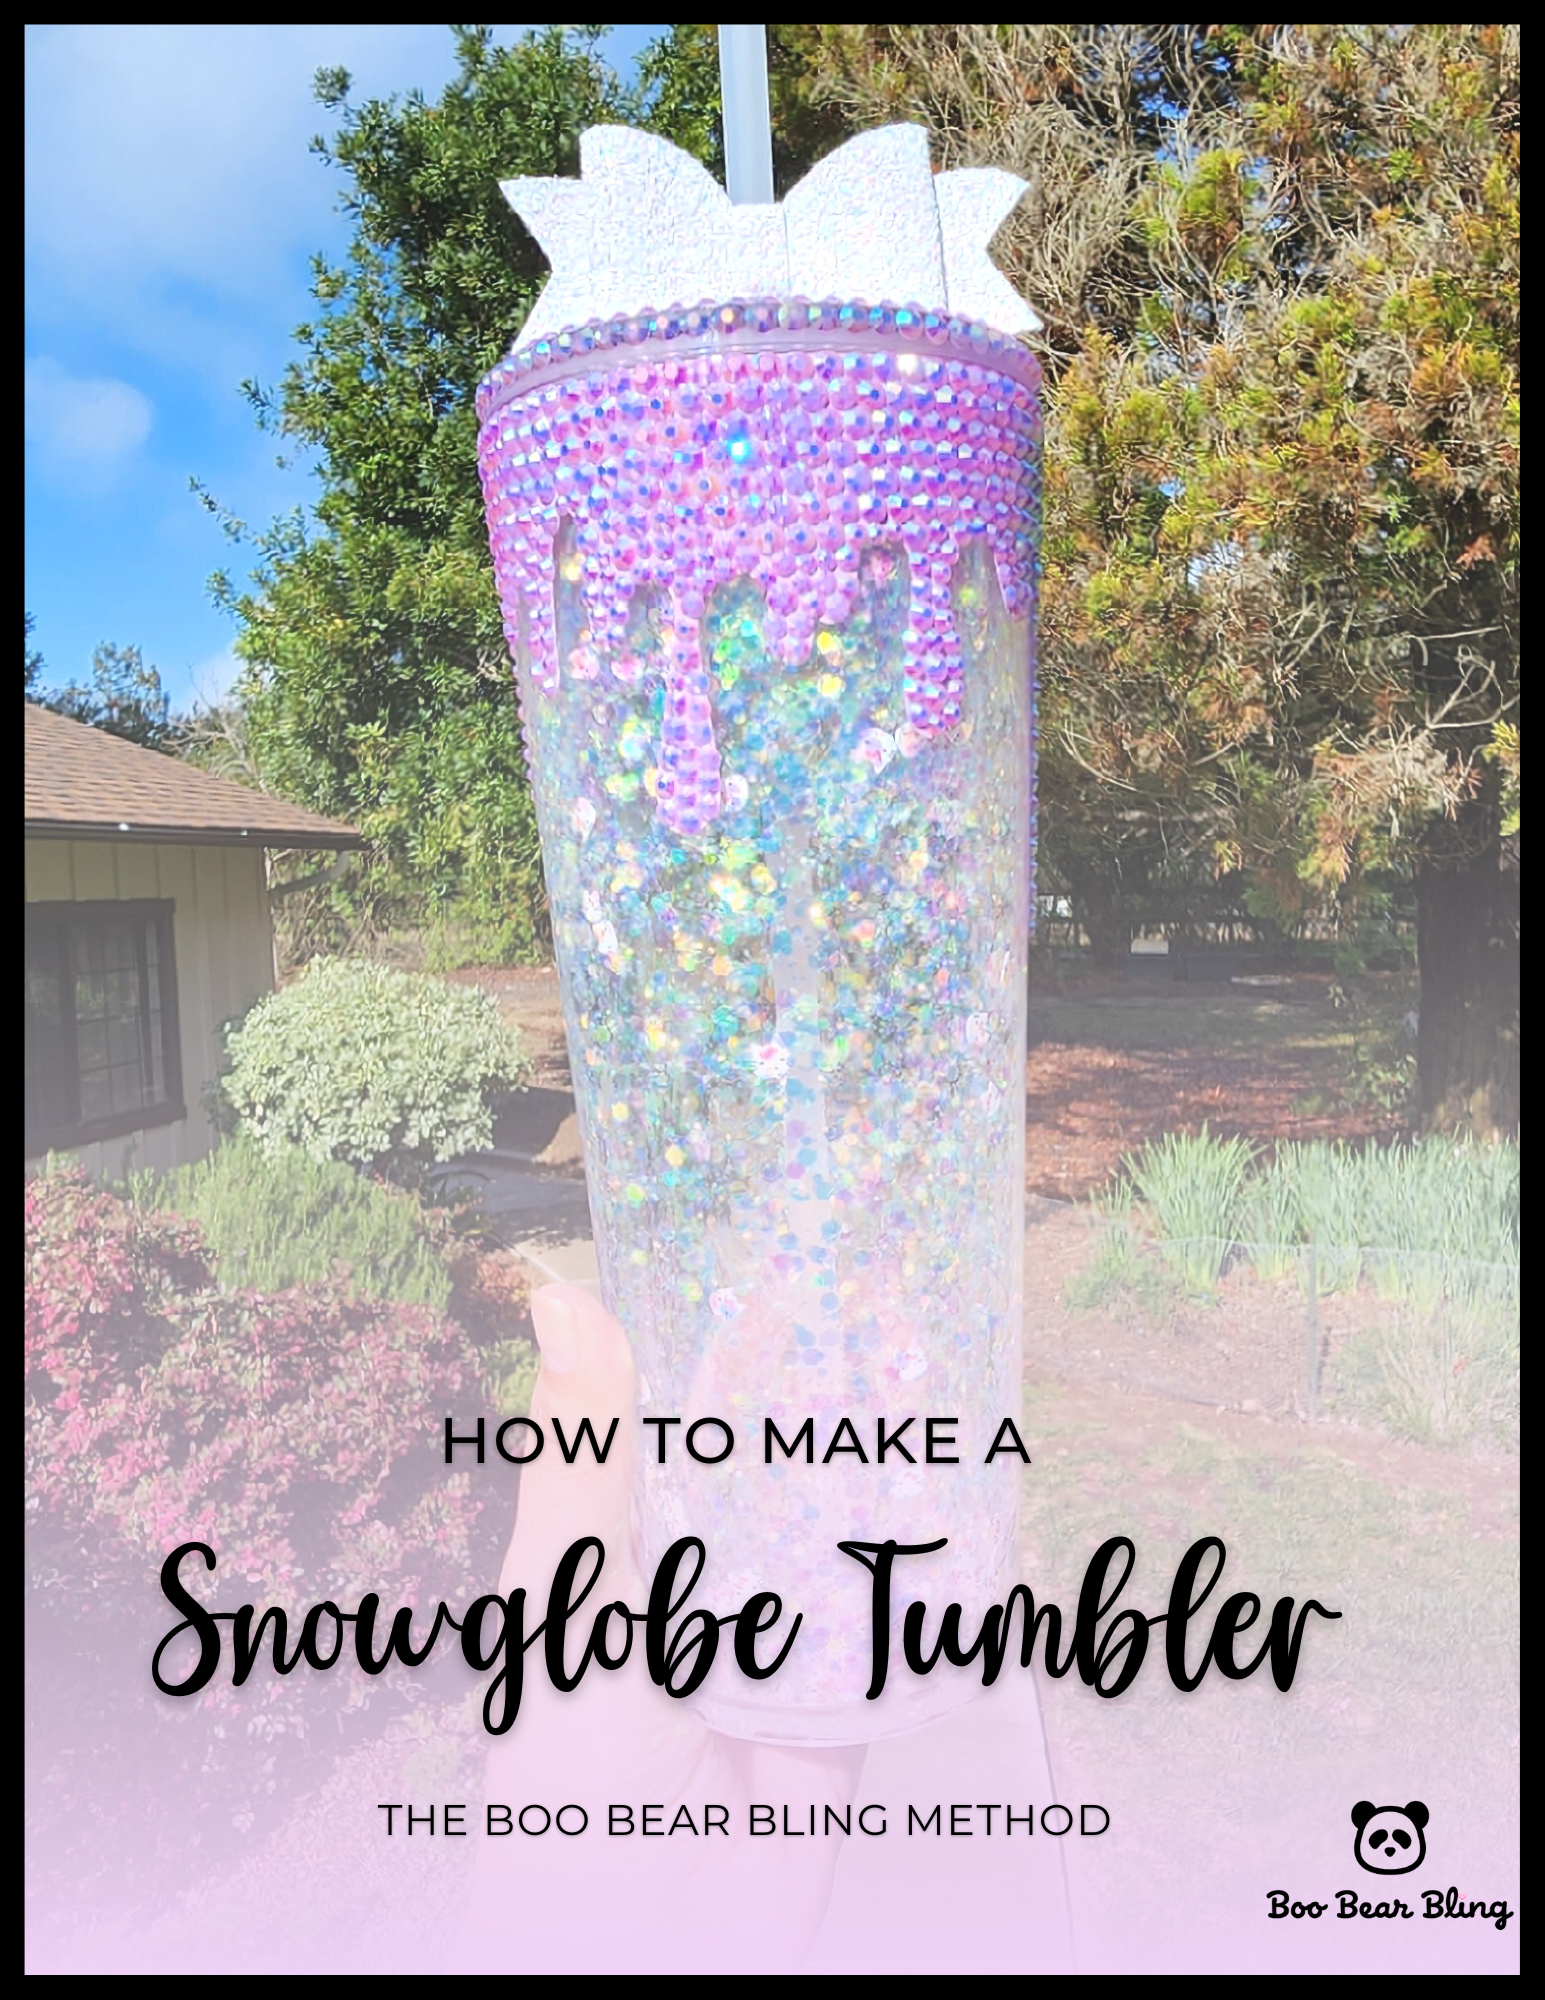 How To Make A Snow Globe Tumbler? Step by Step Guide